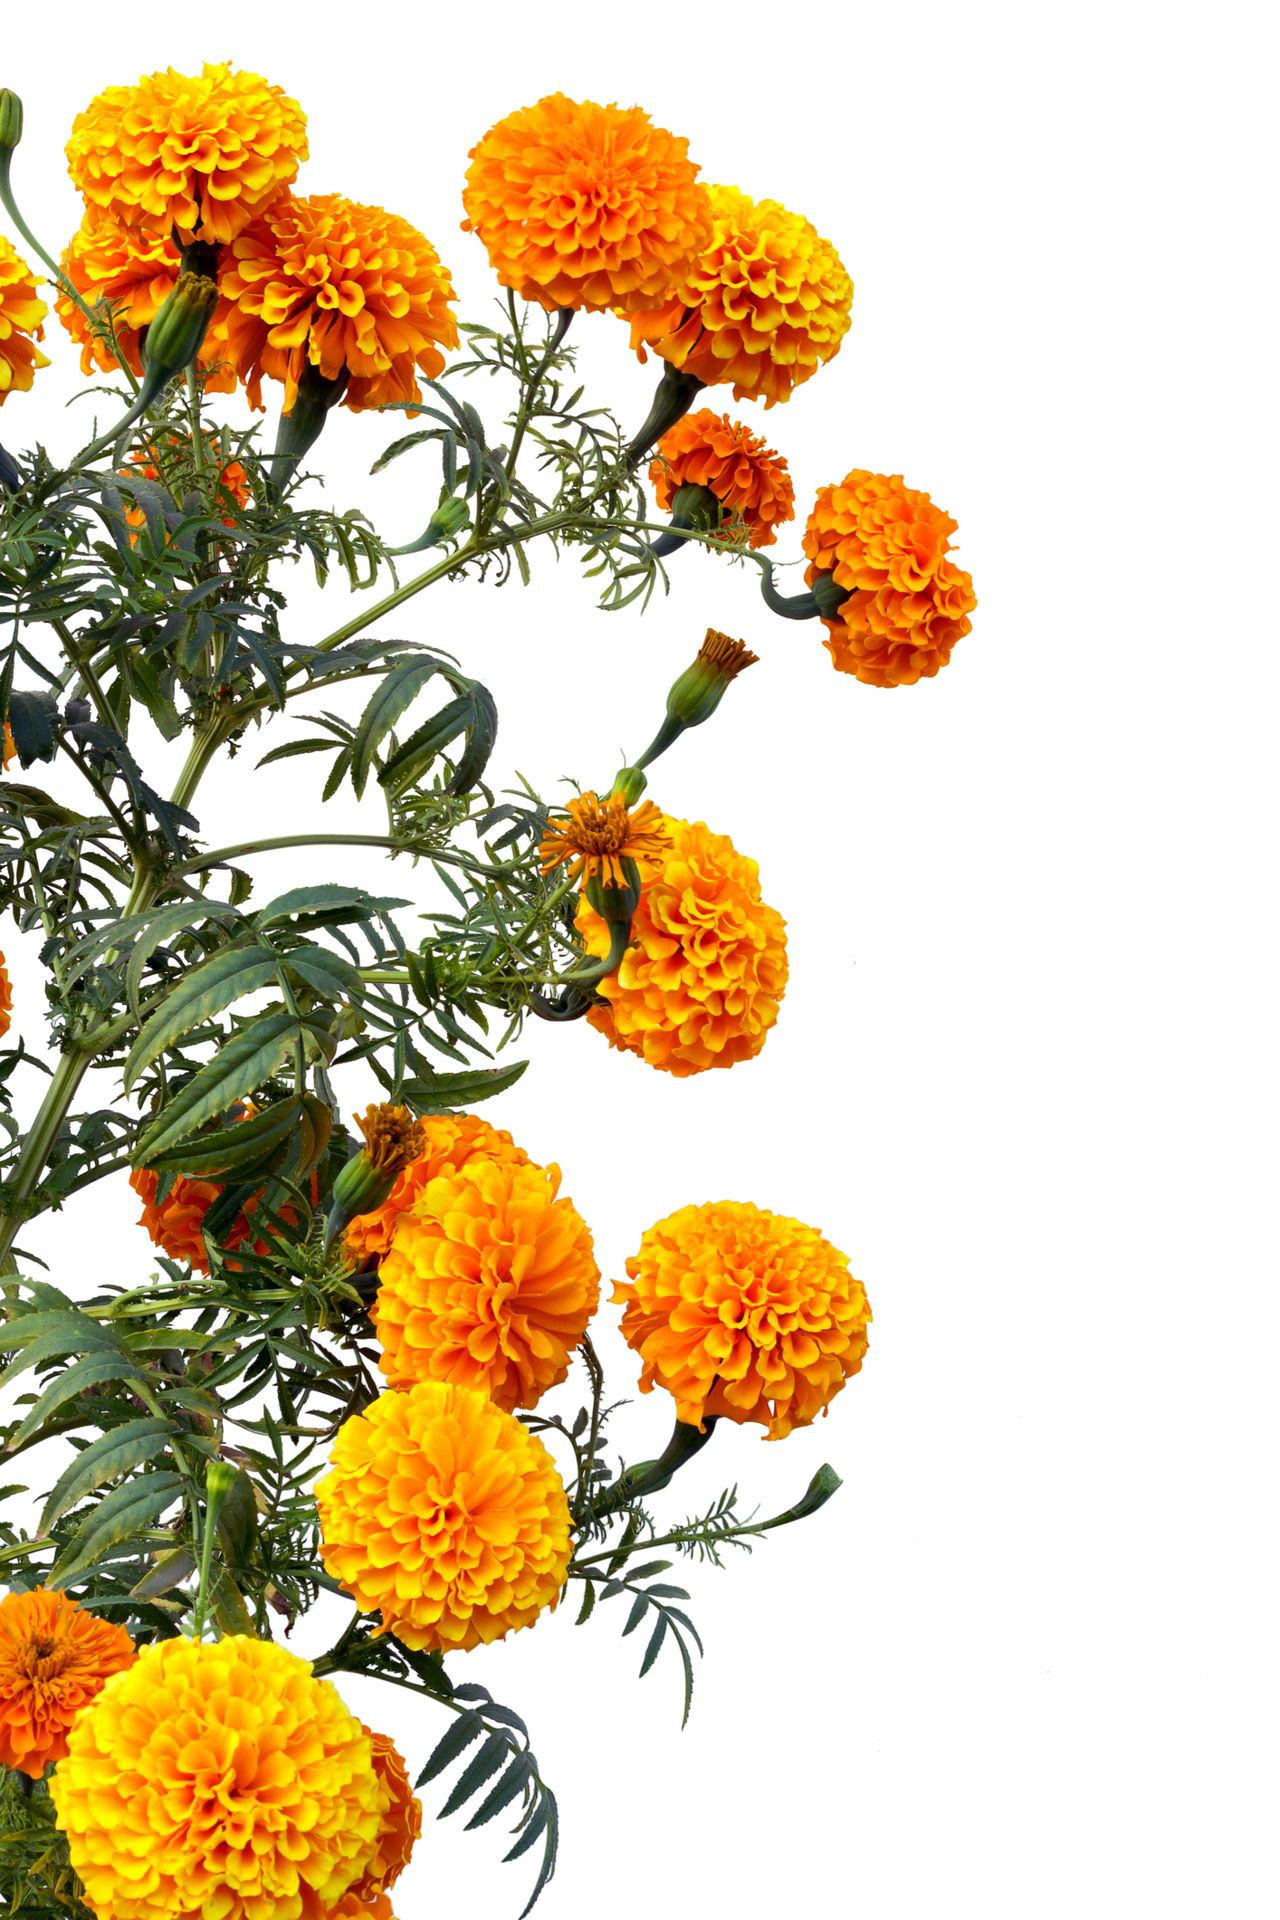 The Floral Guide: What Does a Marigold Flower Actually Symbolize?